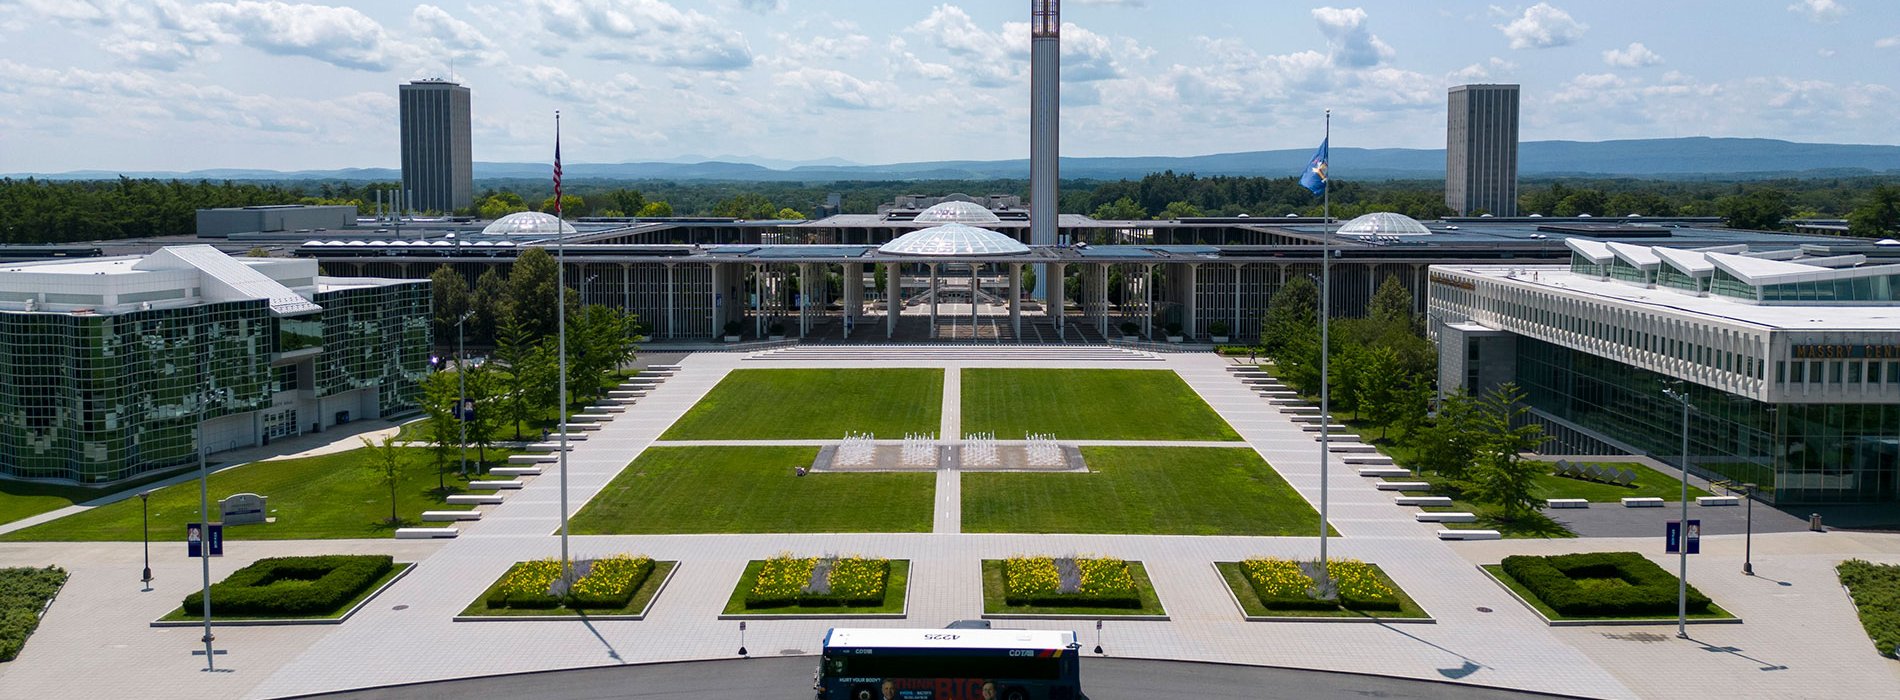 Aerial view of campus entrance